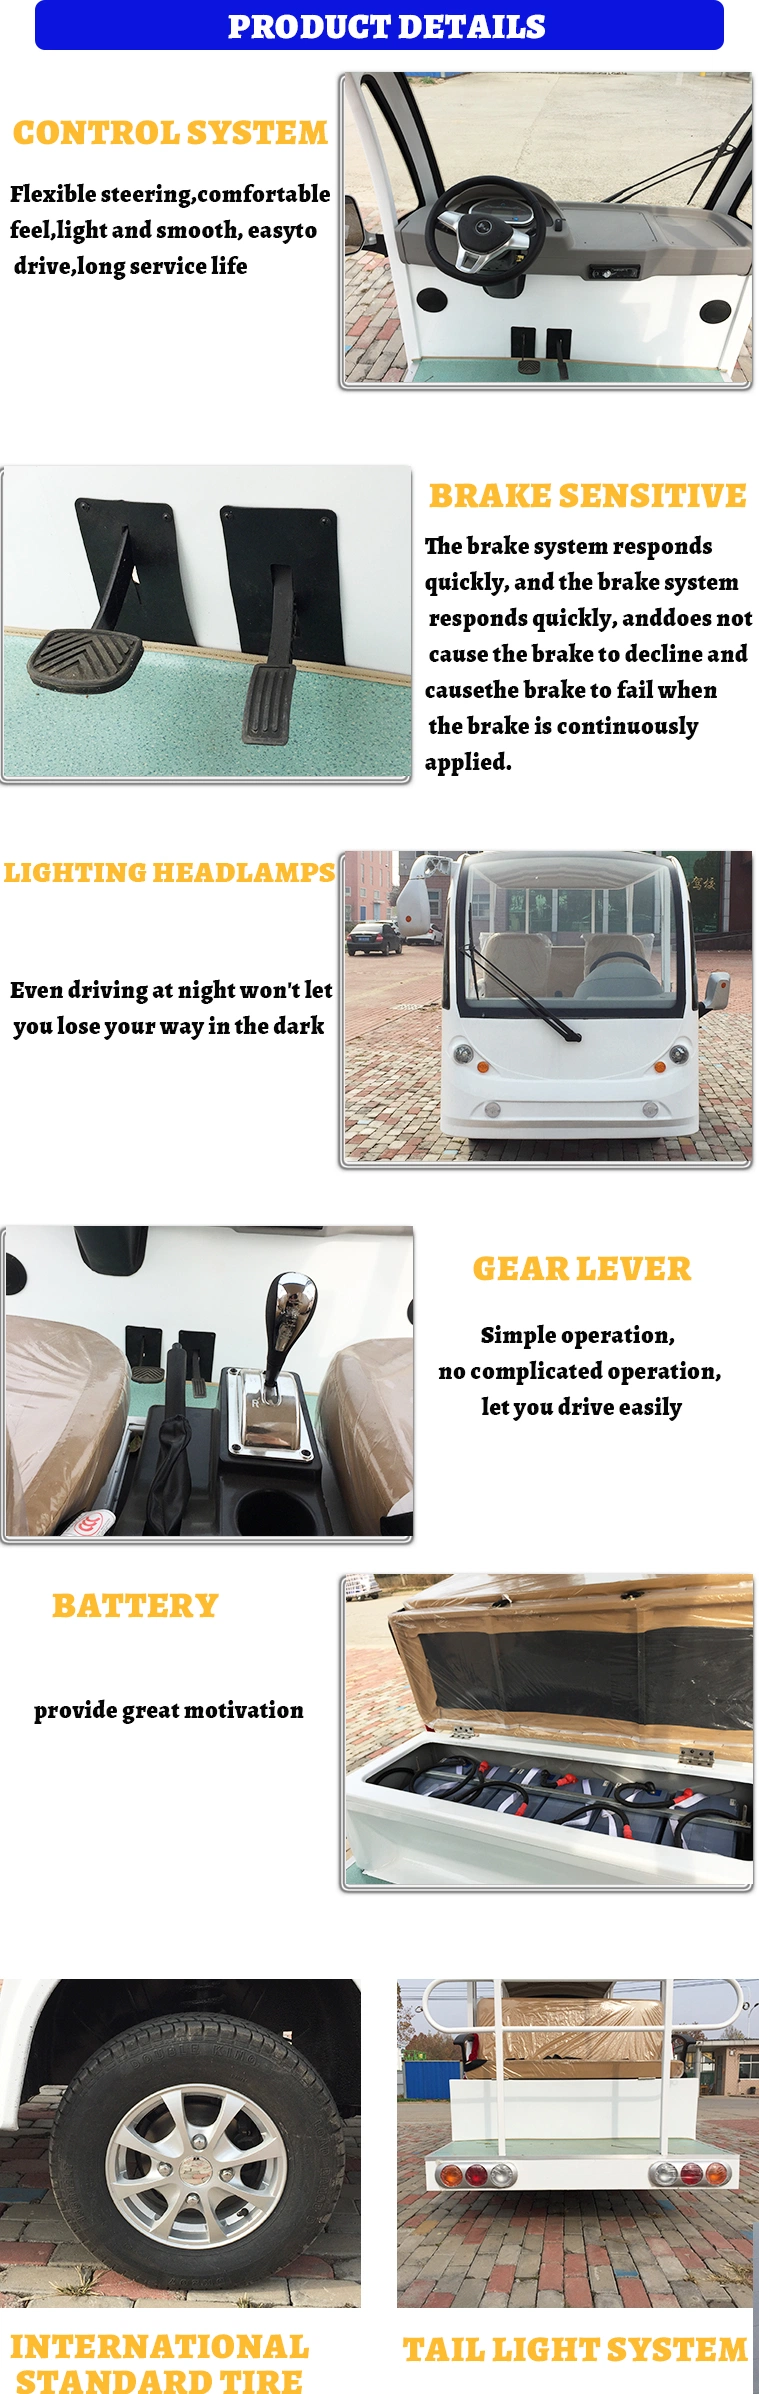 New Energy 8 Passenger Electric Tourist Sightseeing Car